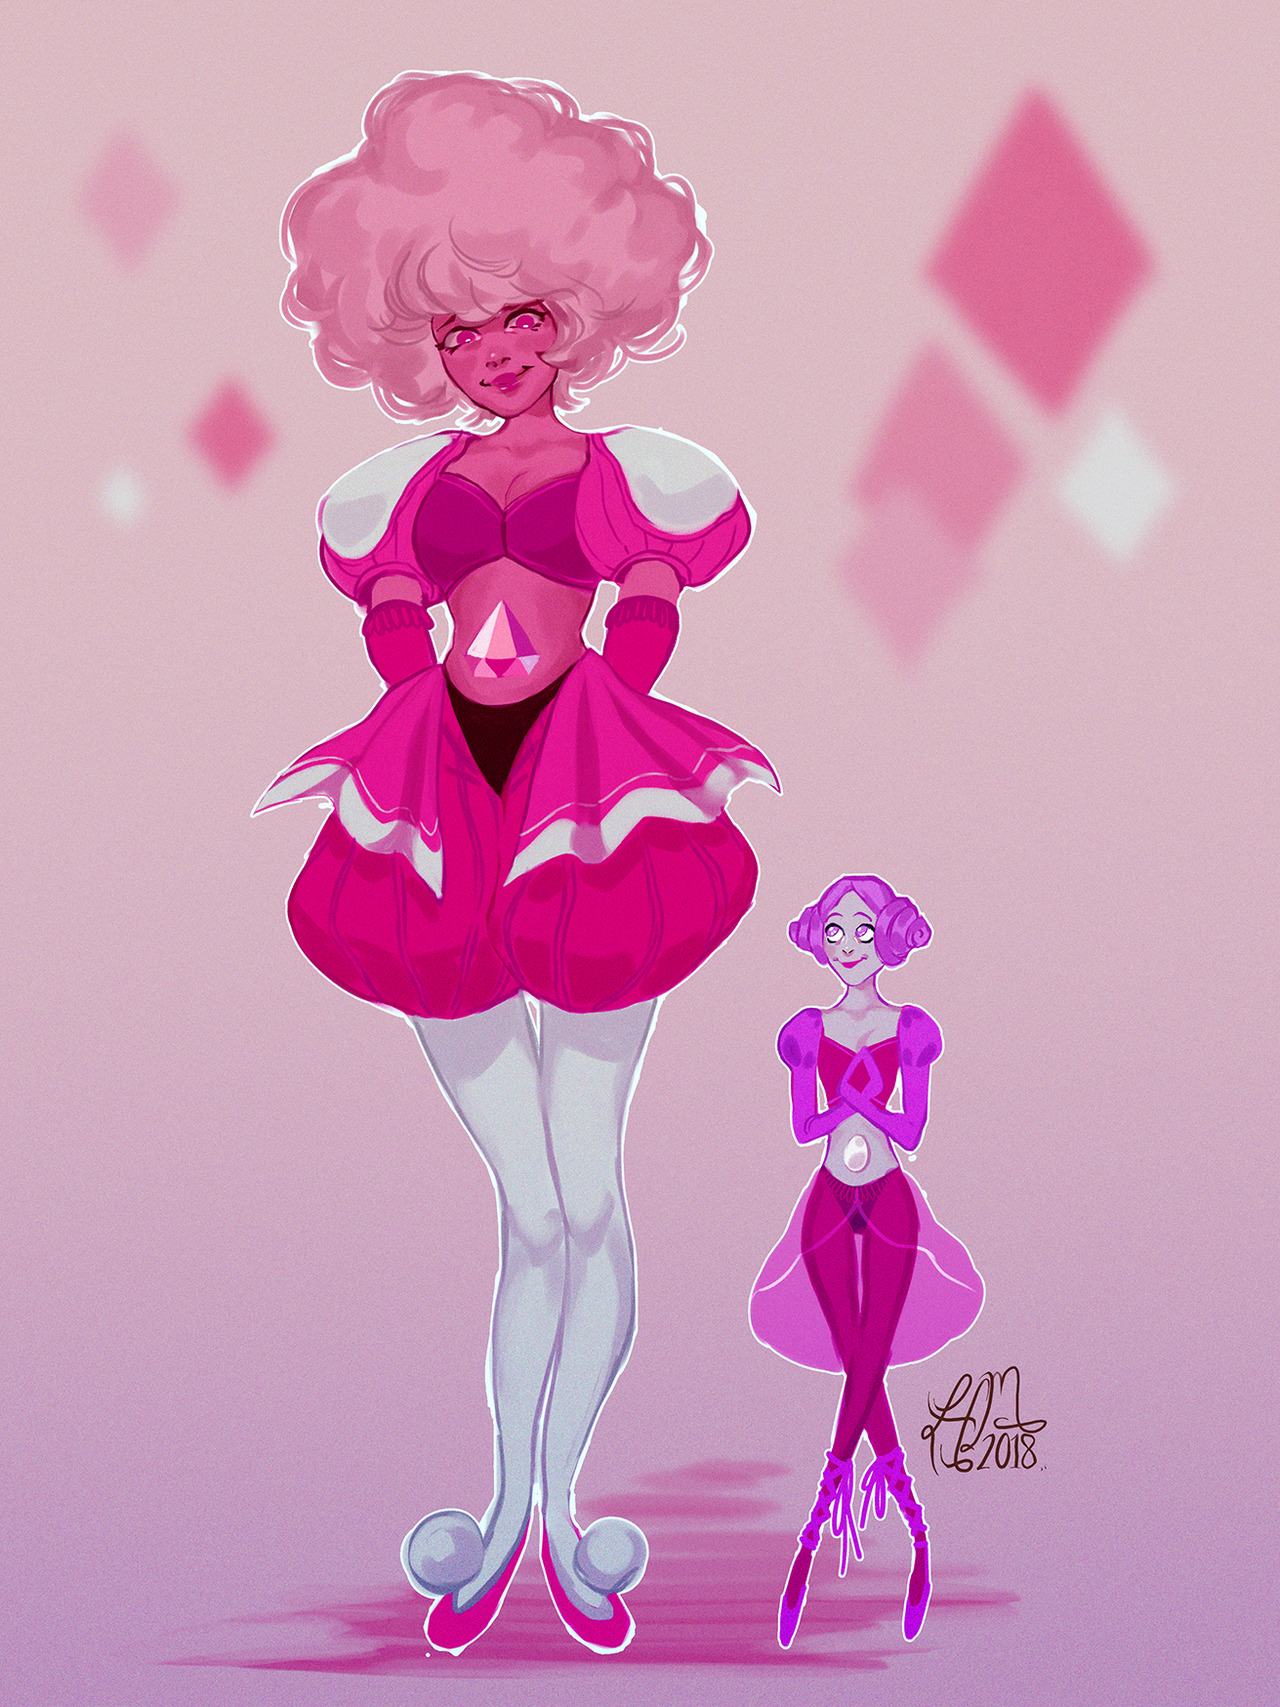 she was my friend… -Last pic of 2018 inspired by the new Steven Universe ep which got me SHOOK